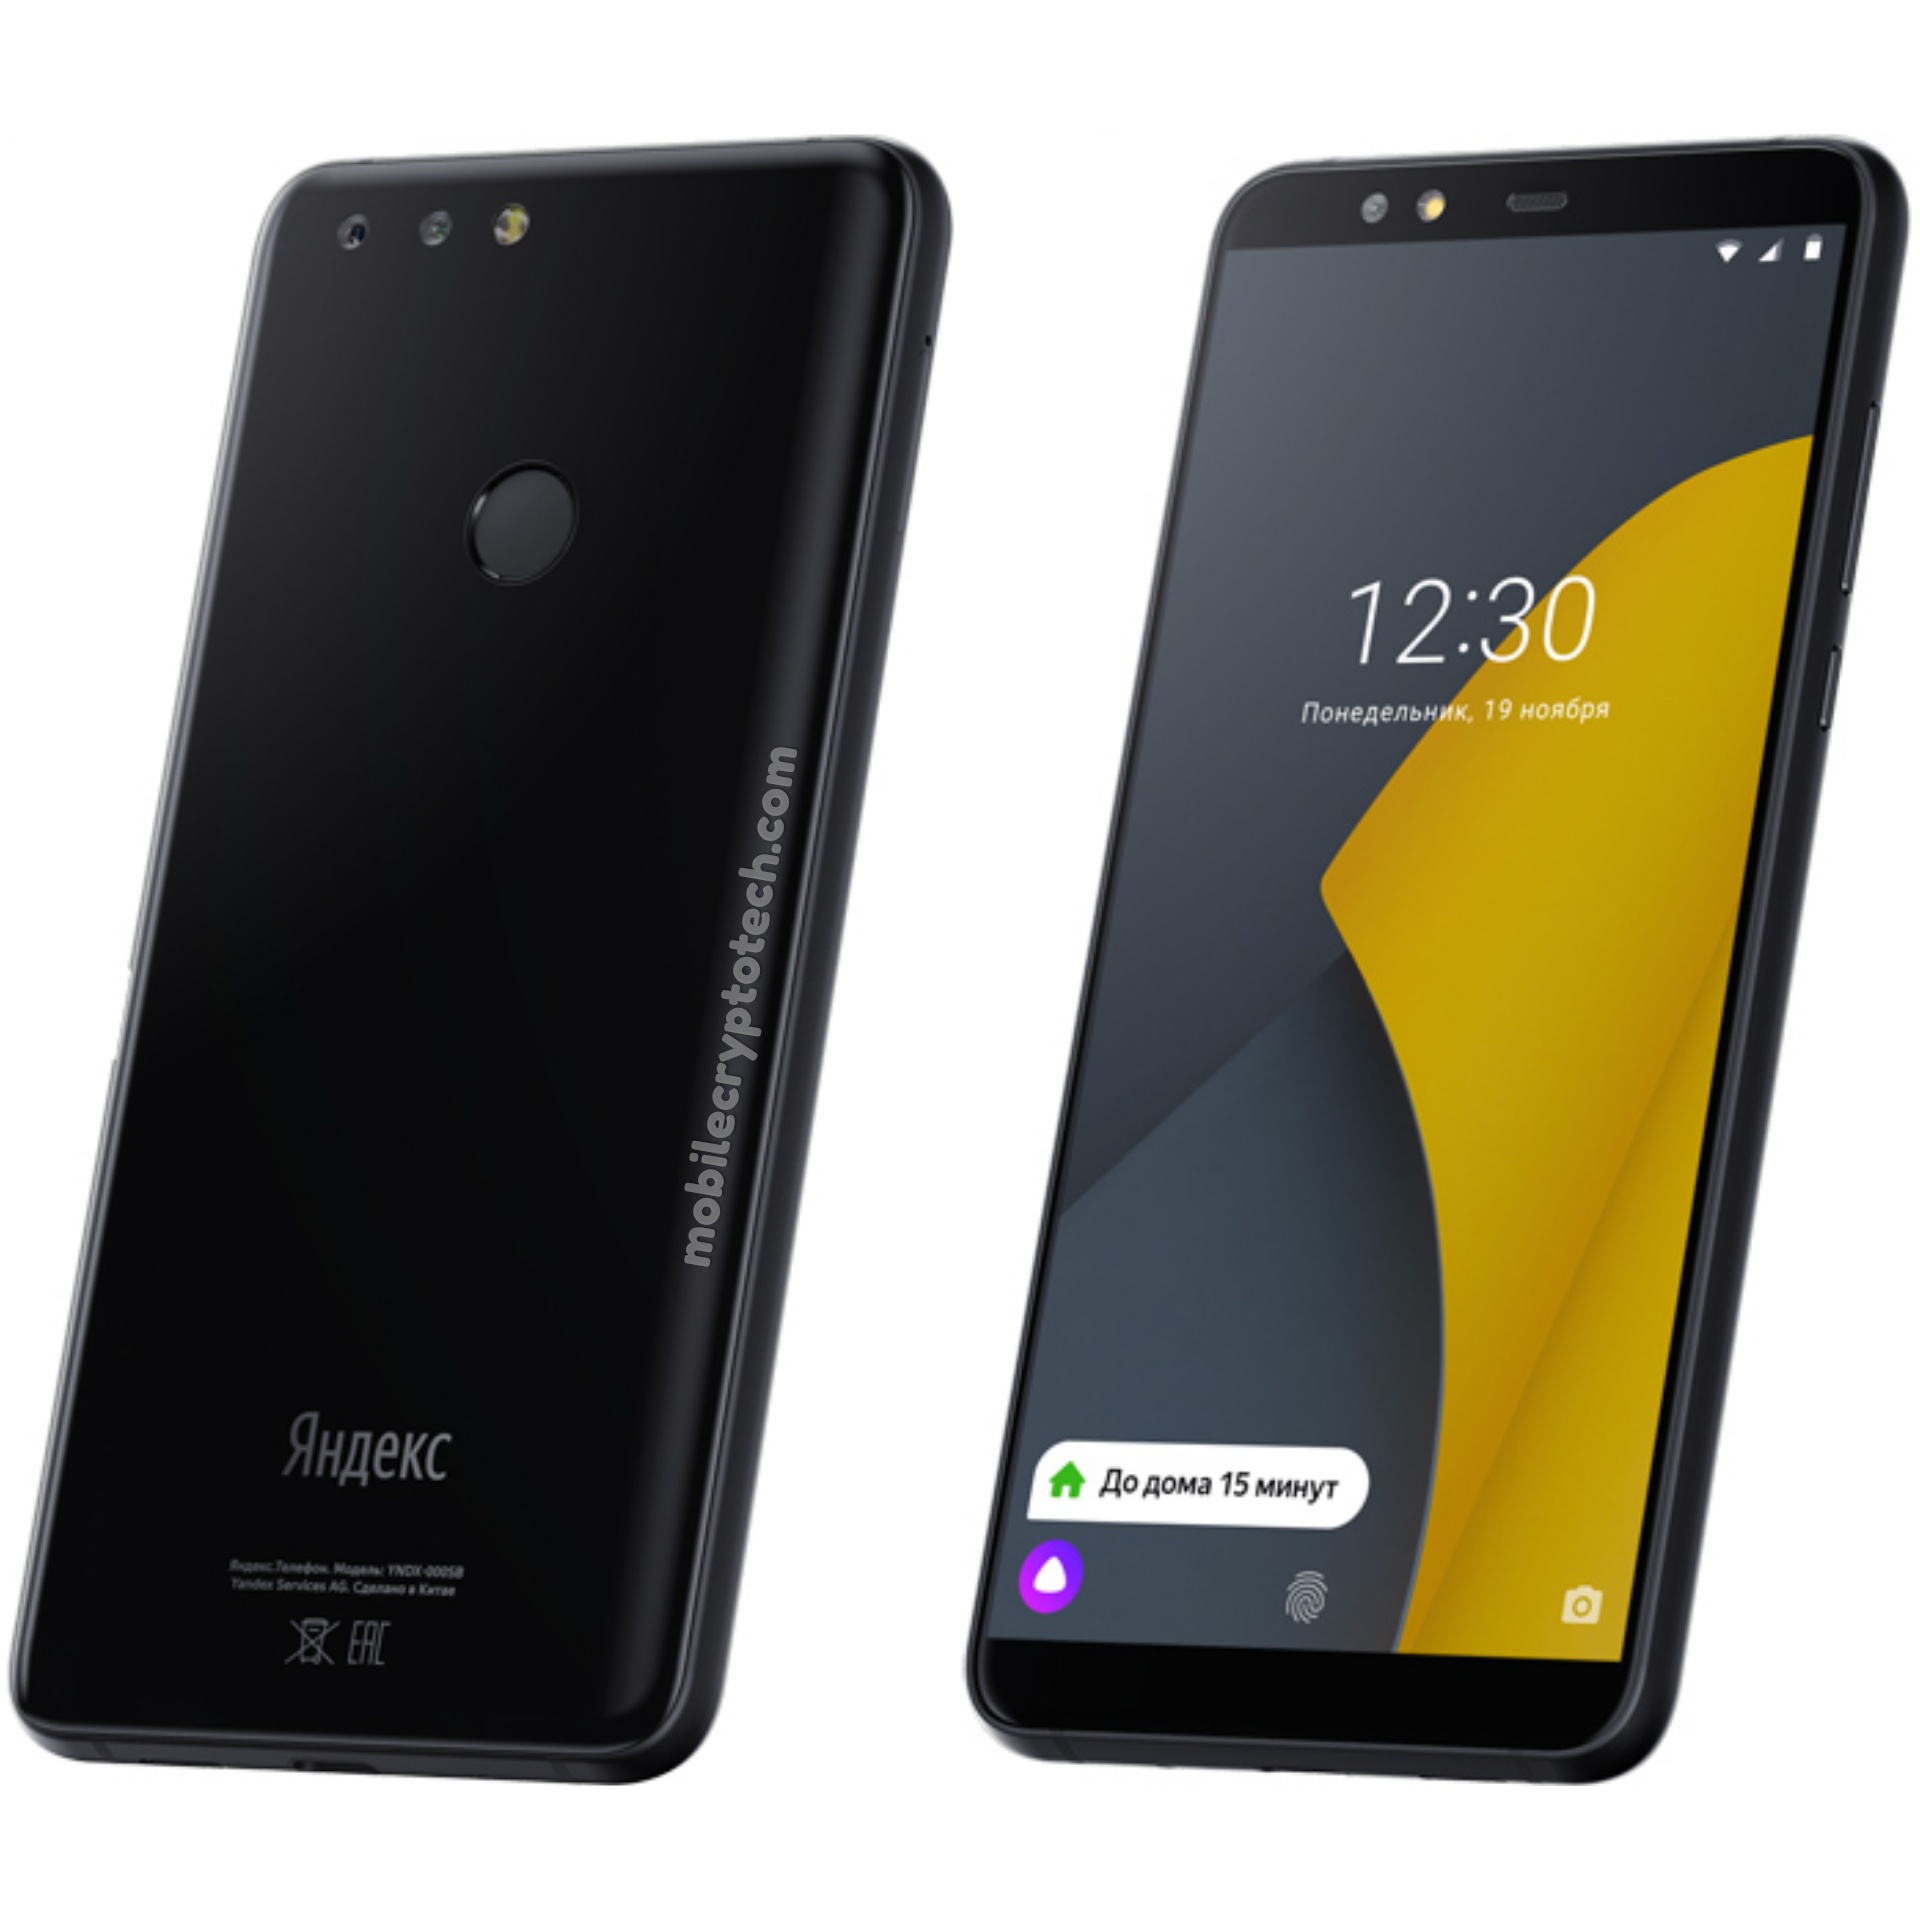 Yandex Smartphone Specs, Video Review, Price and Buy